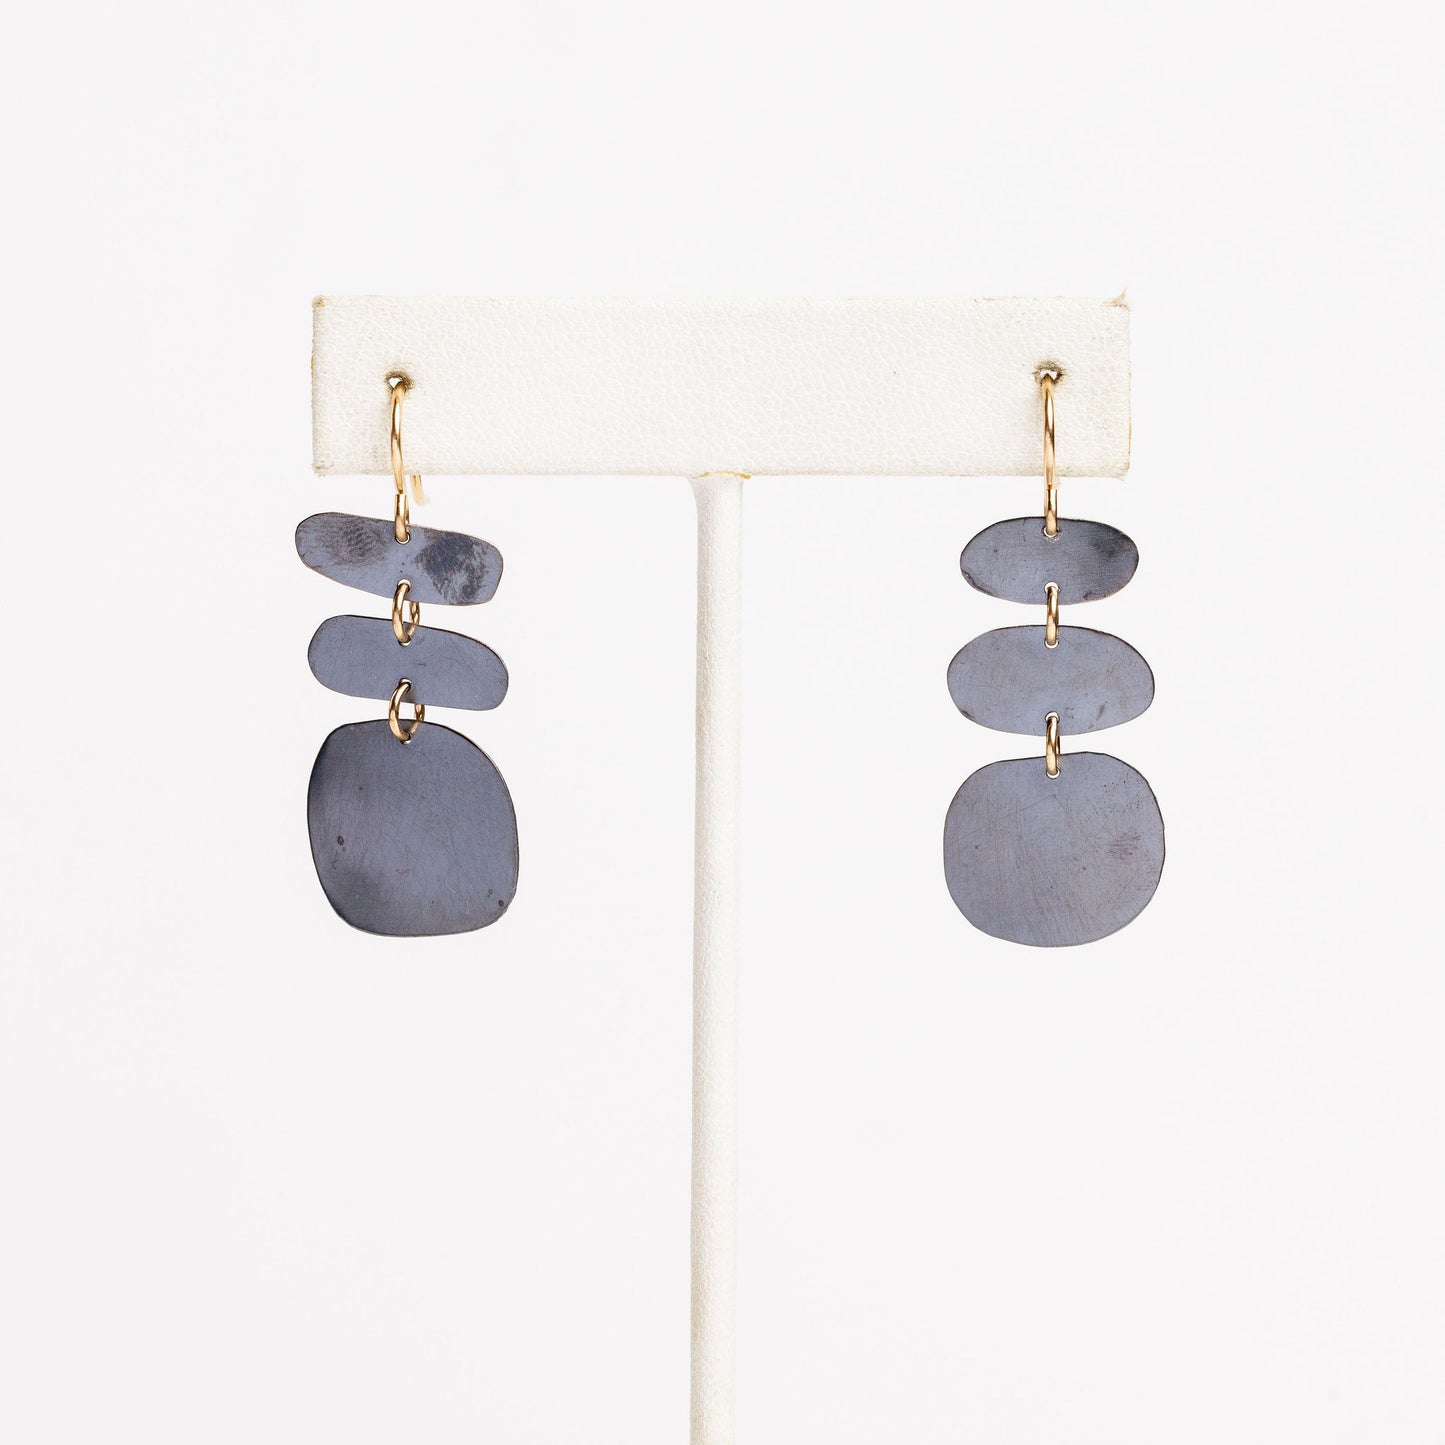 white earring stand with mismatched oxidized silver dandle earrings on a white background